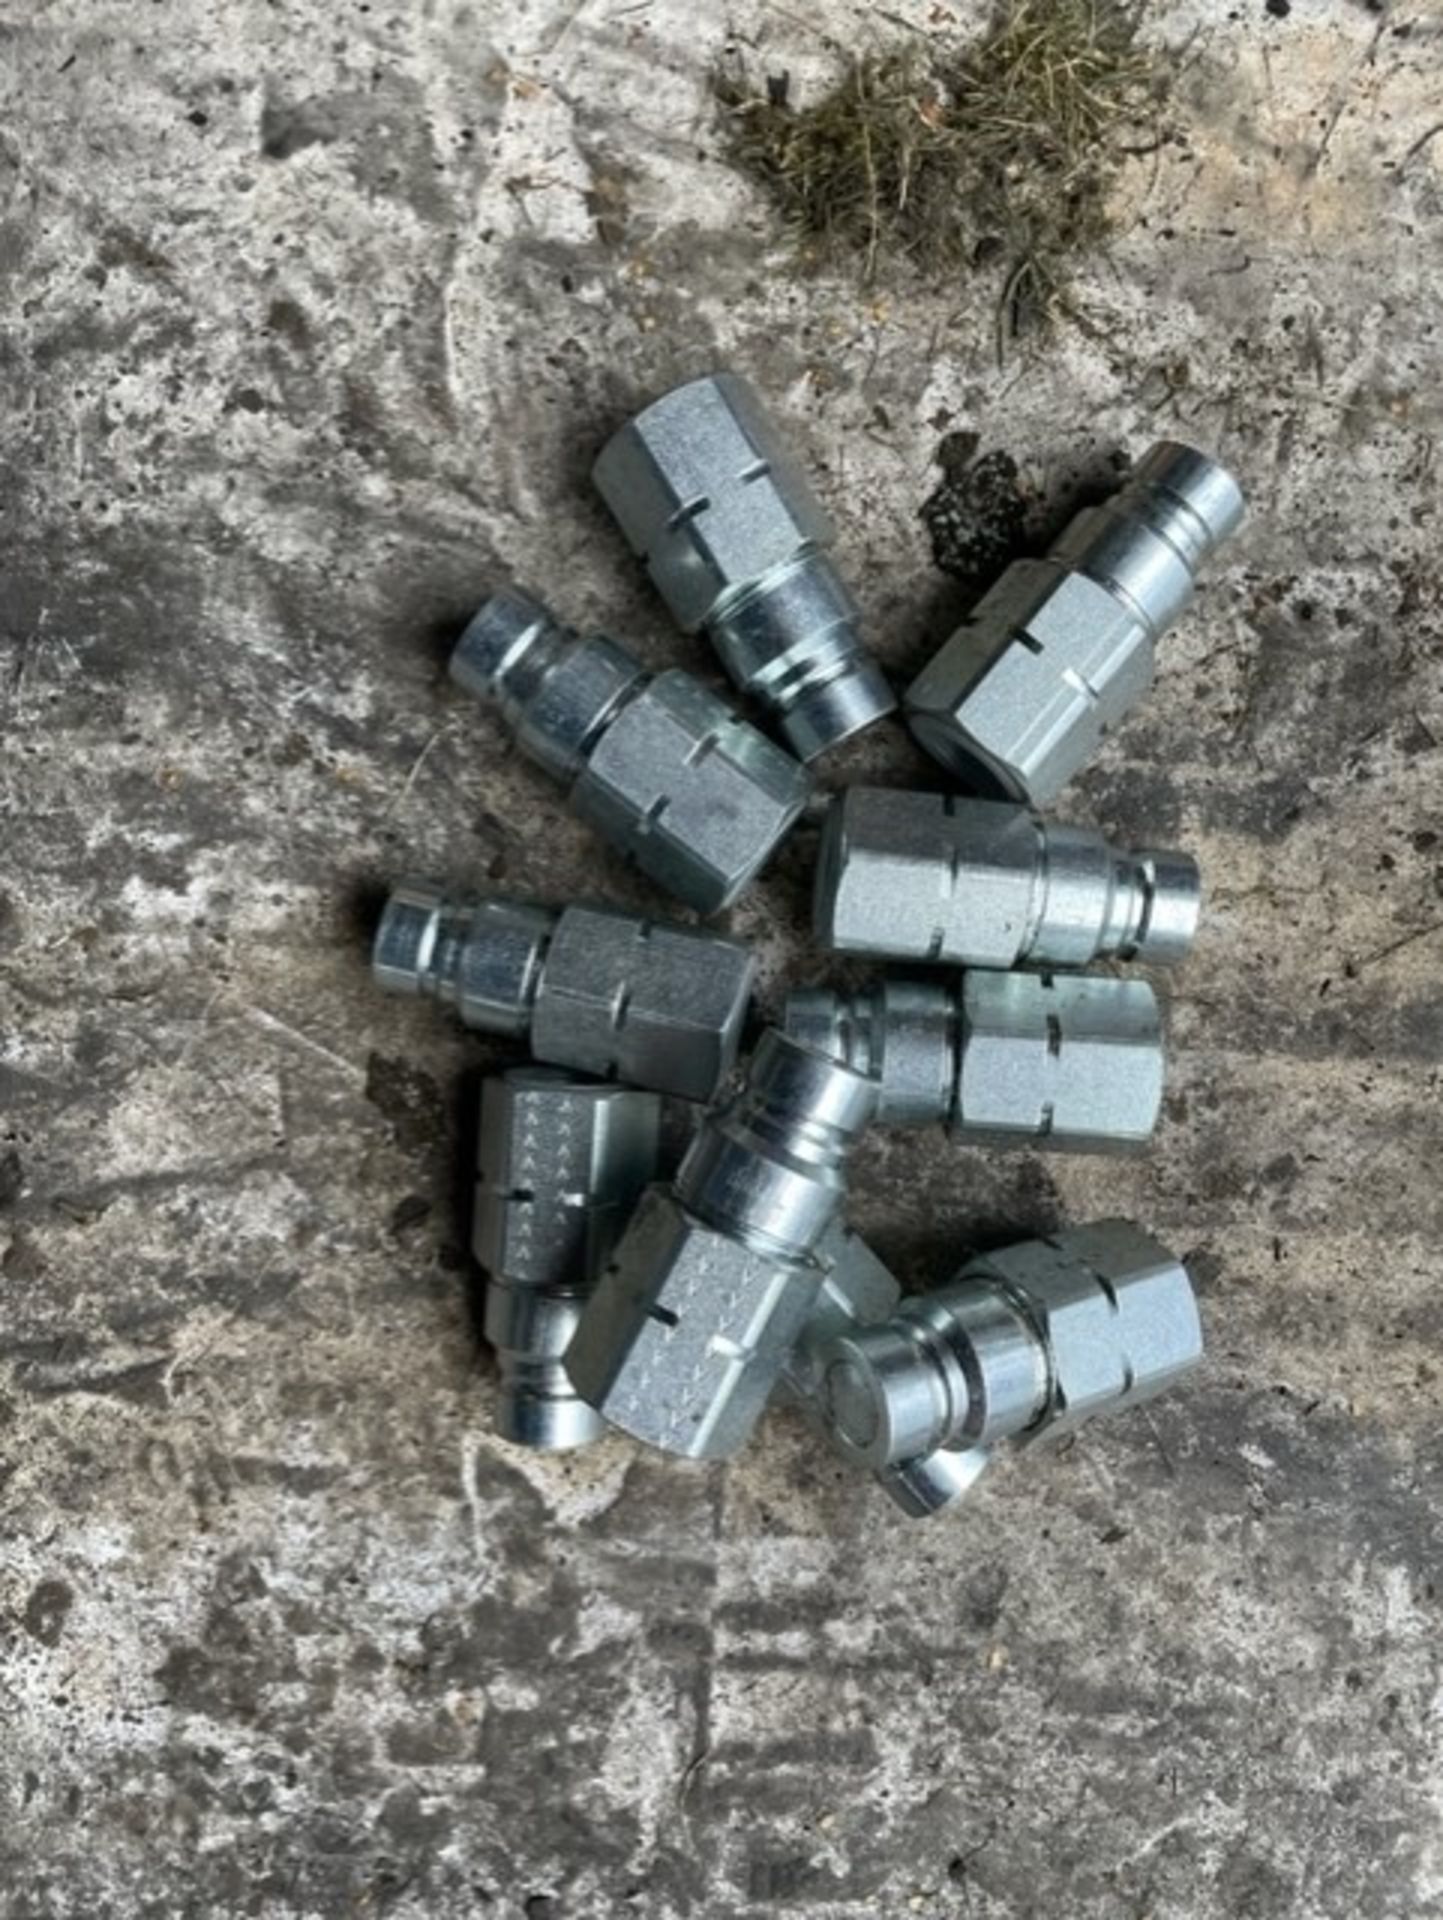 10 number couplings all brand new screw on male ends